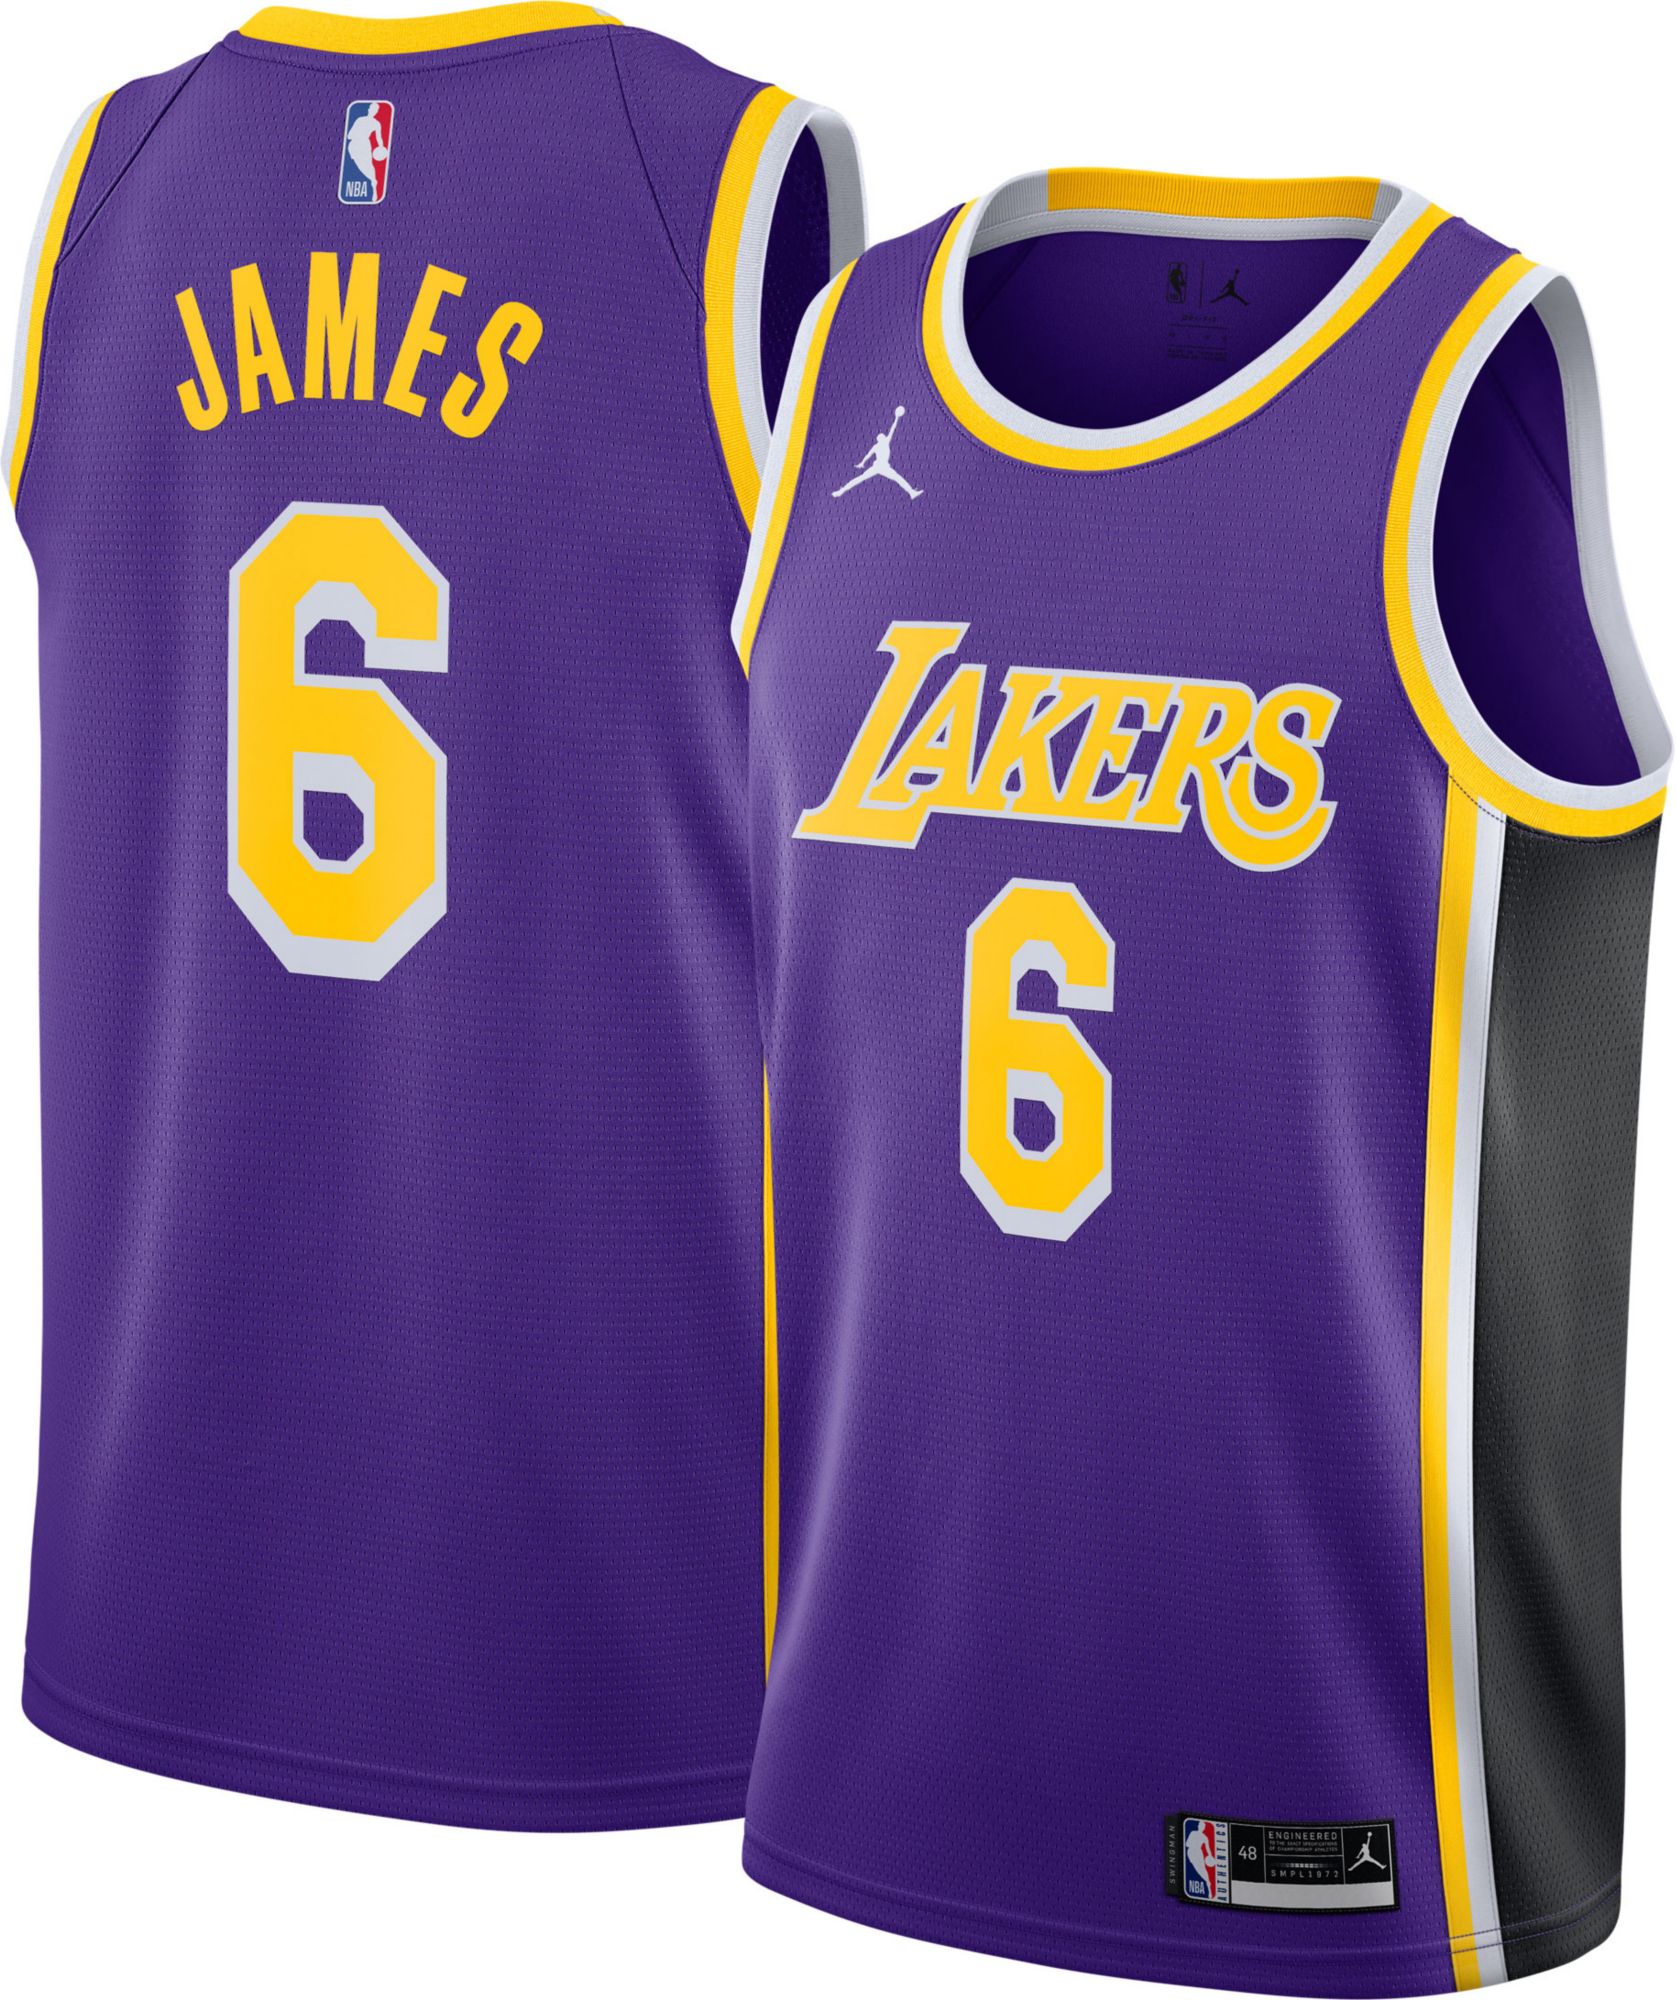 Am going buy myself Lakers jersey LeBron James